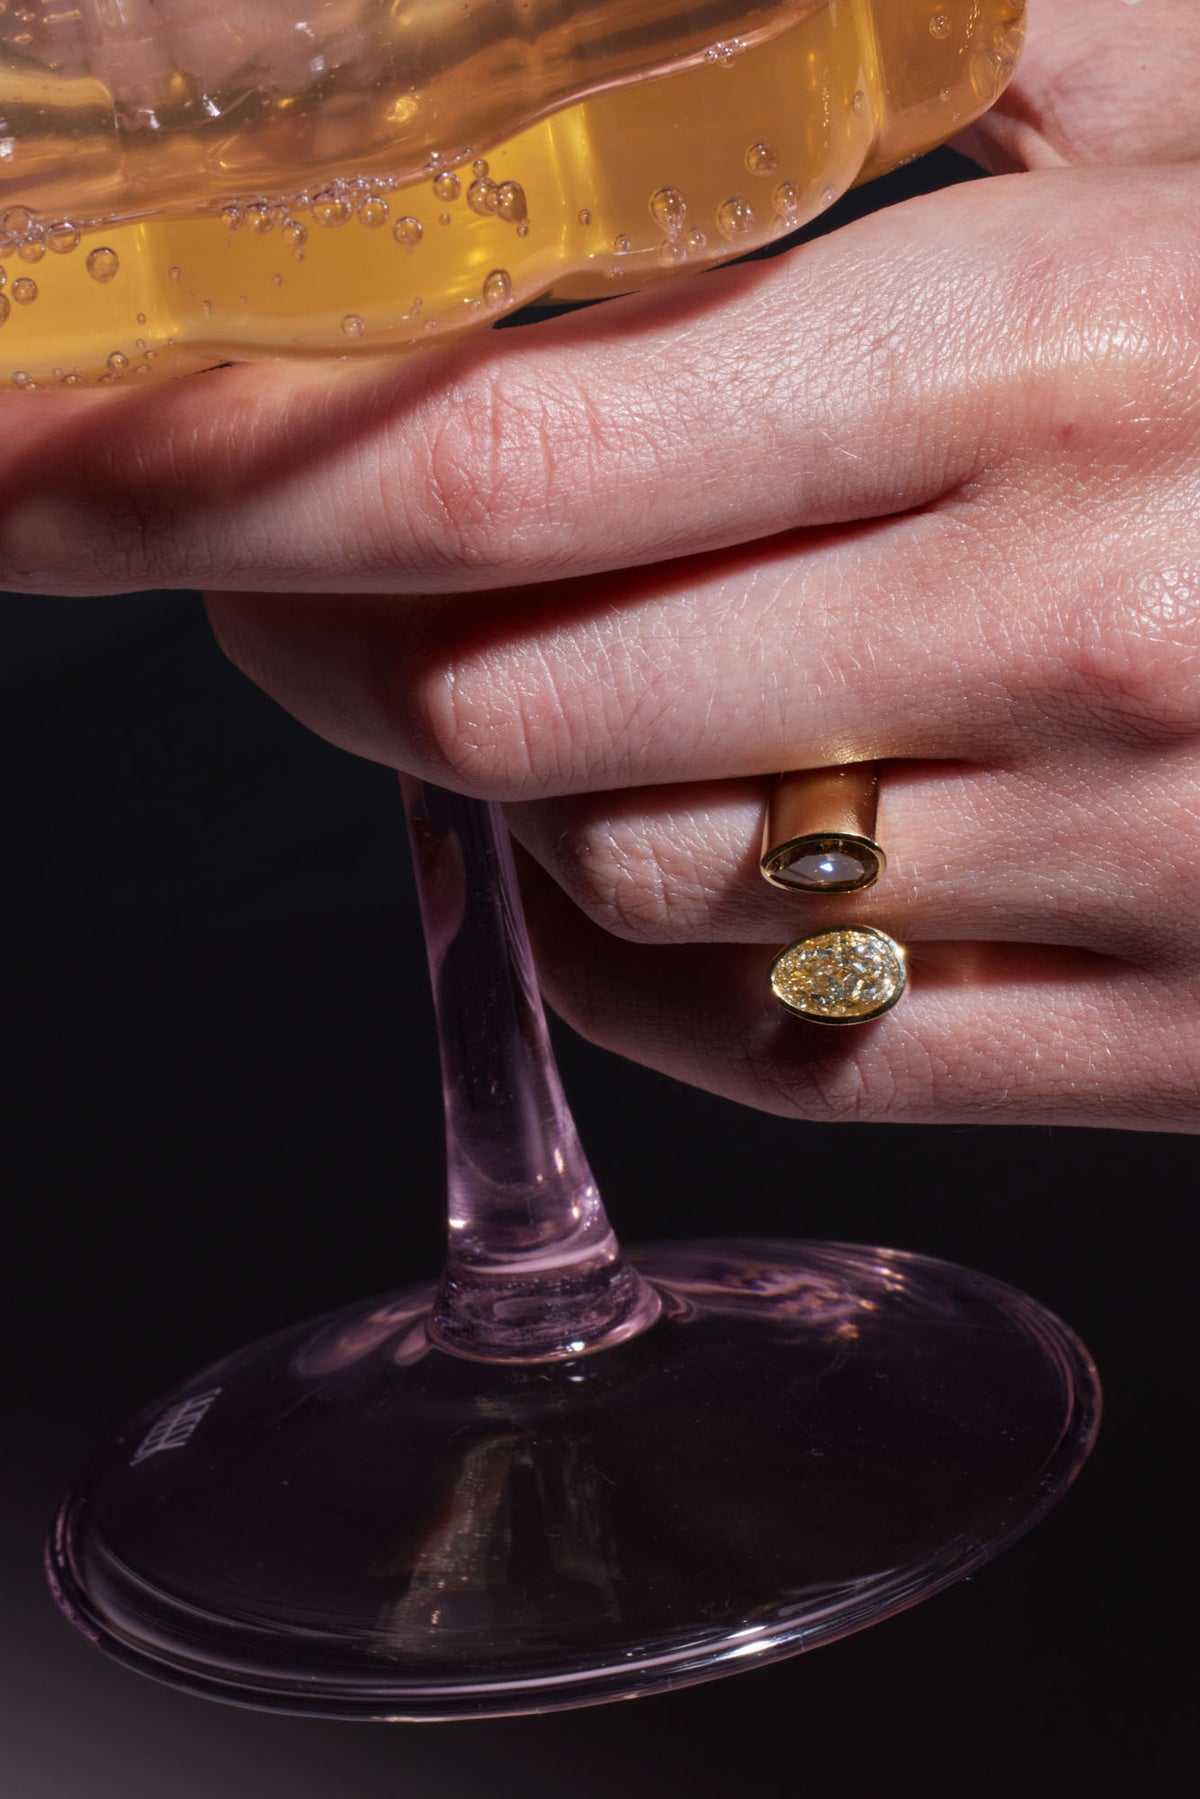 A close-up of a hand holding a glass wearing a Toi et Moi Diamond Ring.